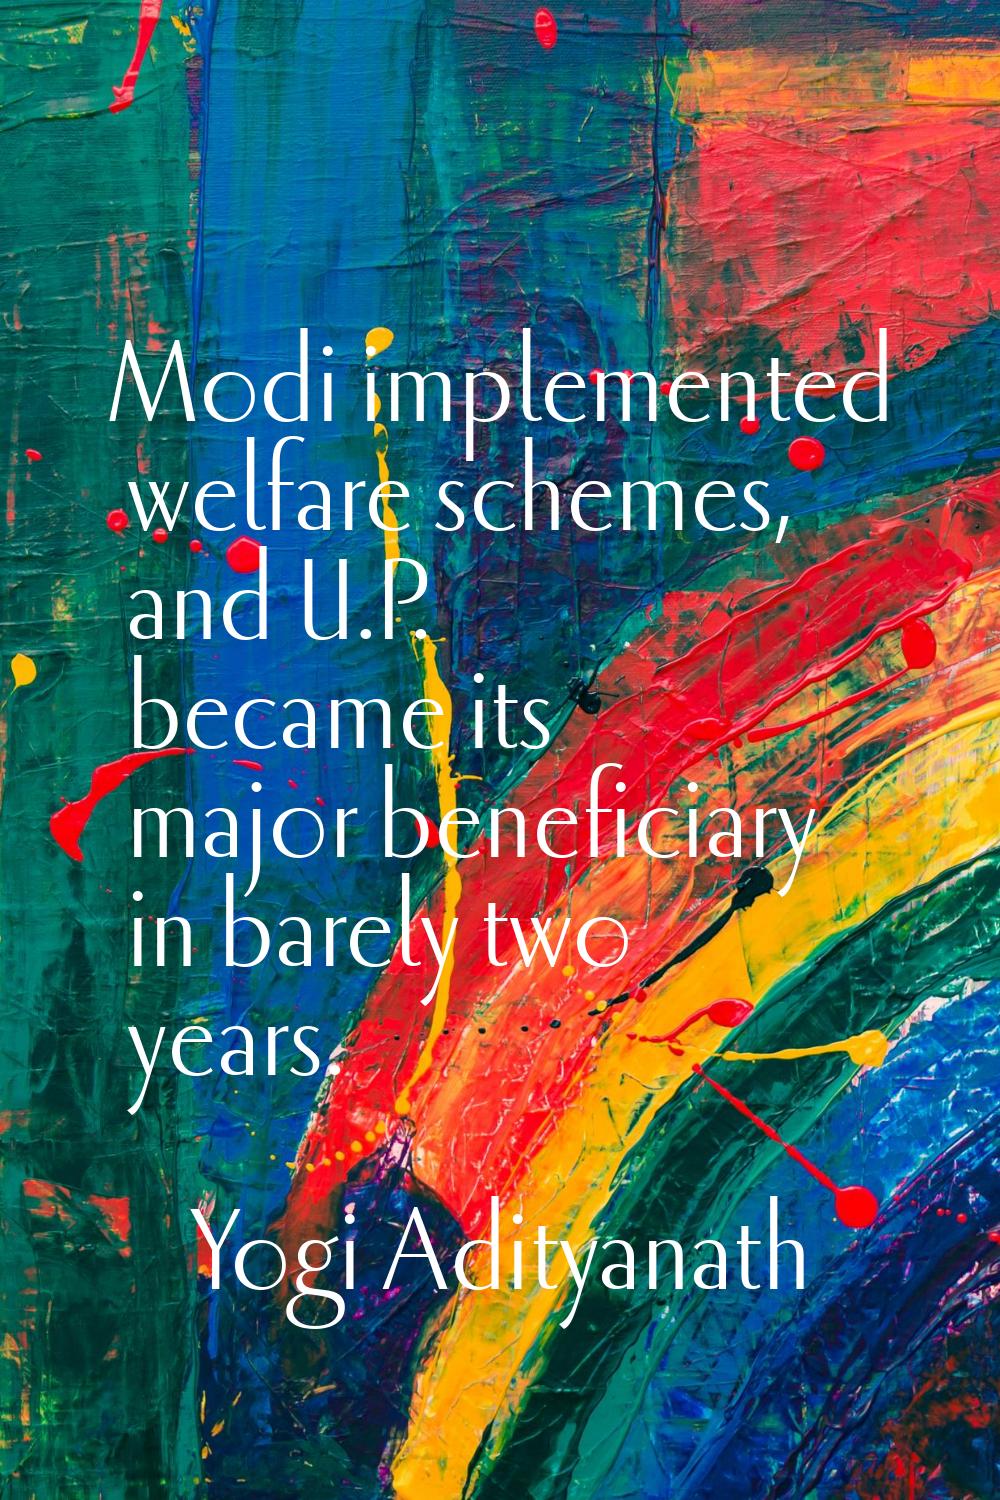 Modi implemented welfare schemes, and U.P. became its major beneficiary in barely two years.